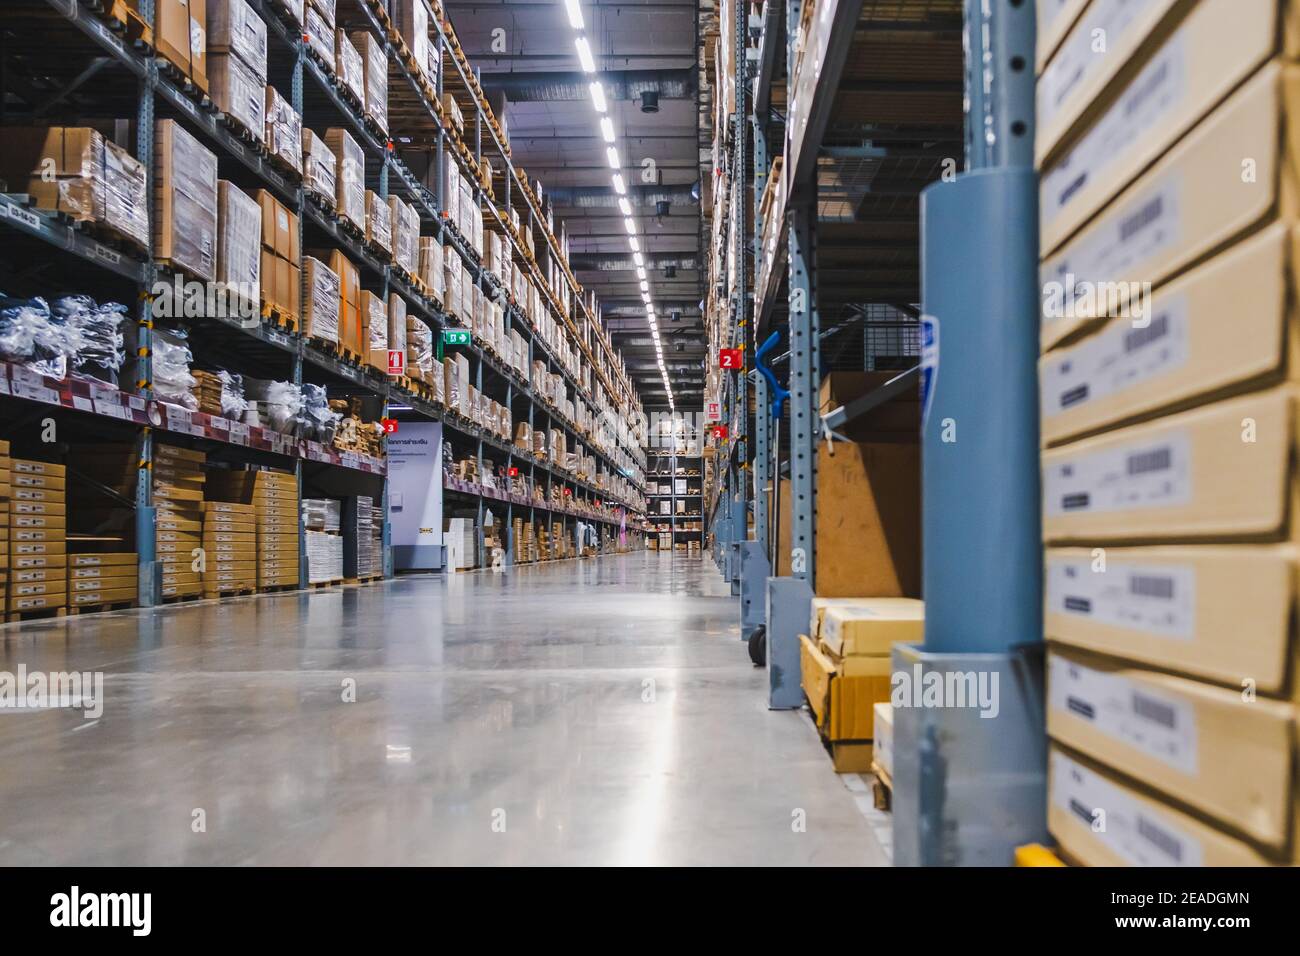 Smut Prakan ,Thailand - August 01,2019 : Warehouse aisle in an IKEA store. IKEA is the world's largest furniture retailer. Stock Photo